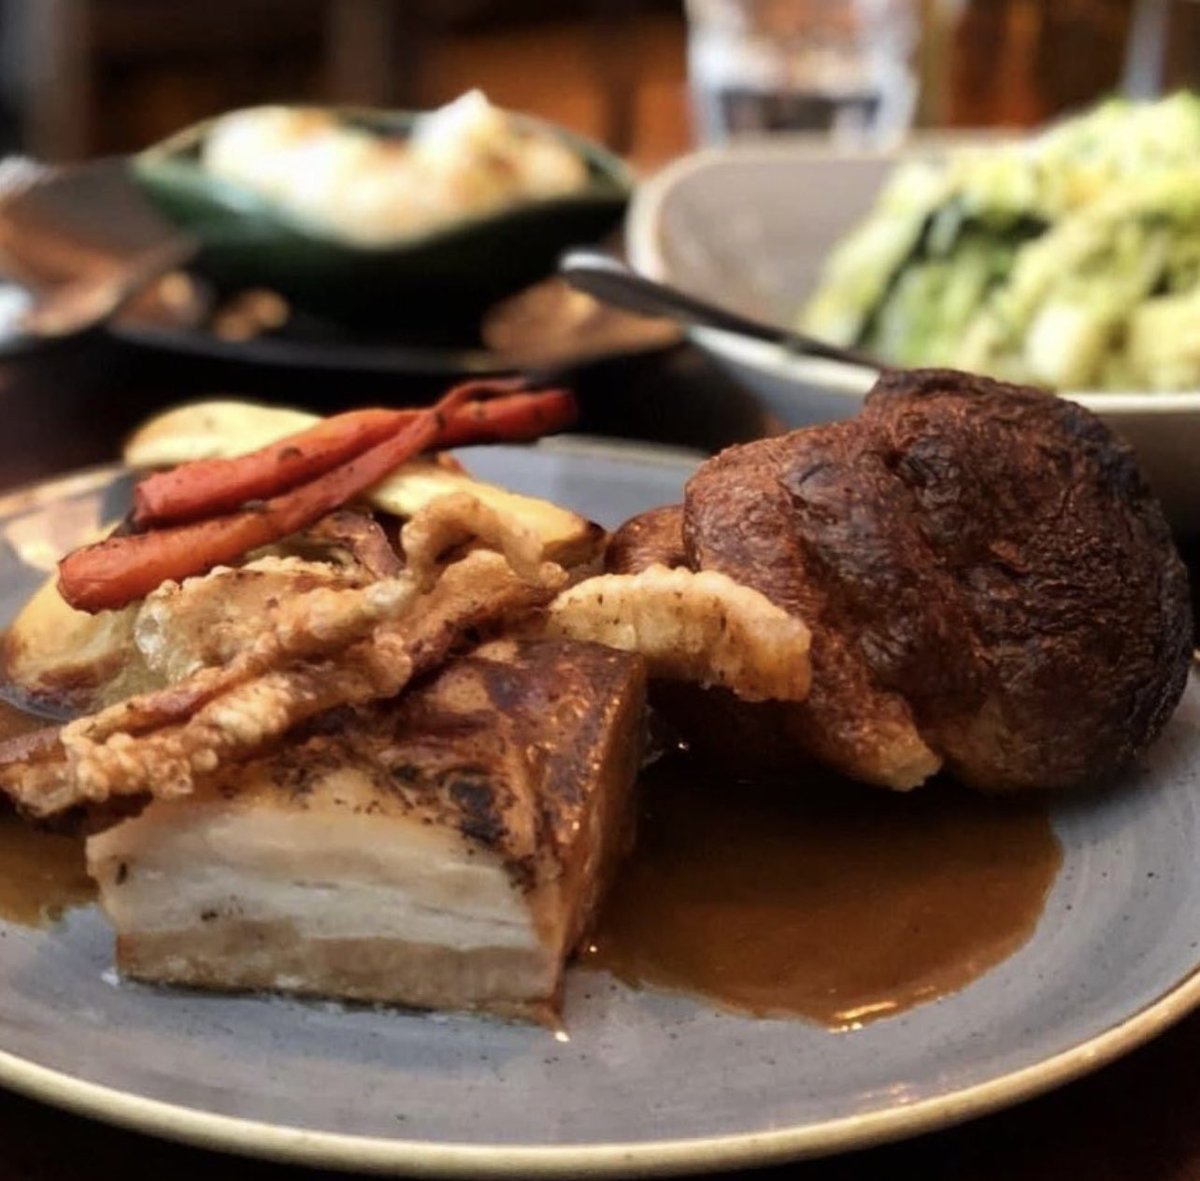 Limited spaces available for Sunday lunch. Don’t miss out on our Porro roast served with all the trimmings and proper gravy. 

#sundayroast #cardiffrestaurant #cardiffeats #welshfood